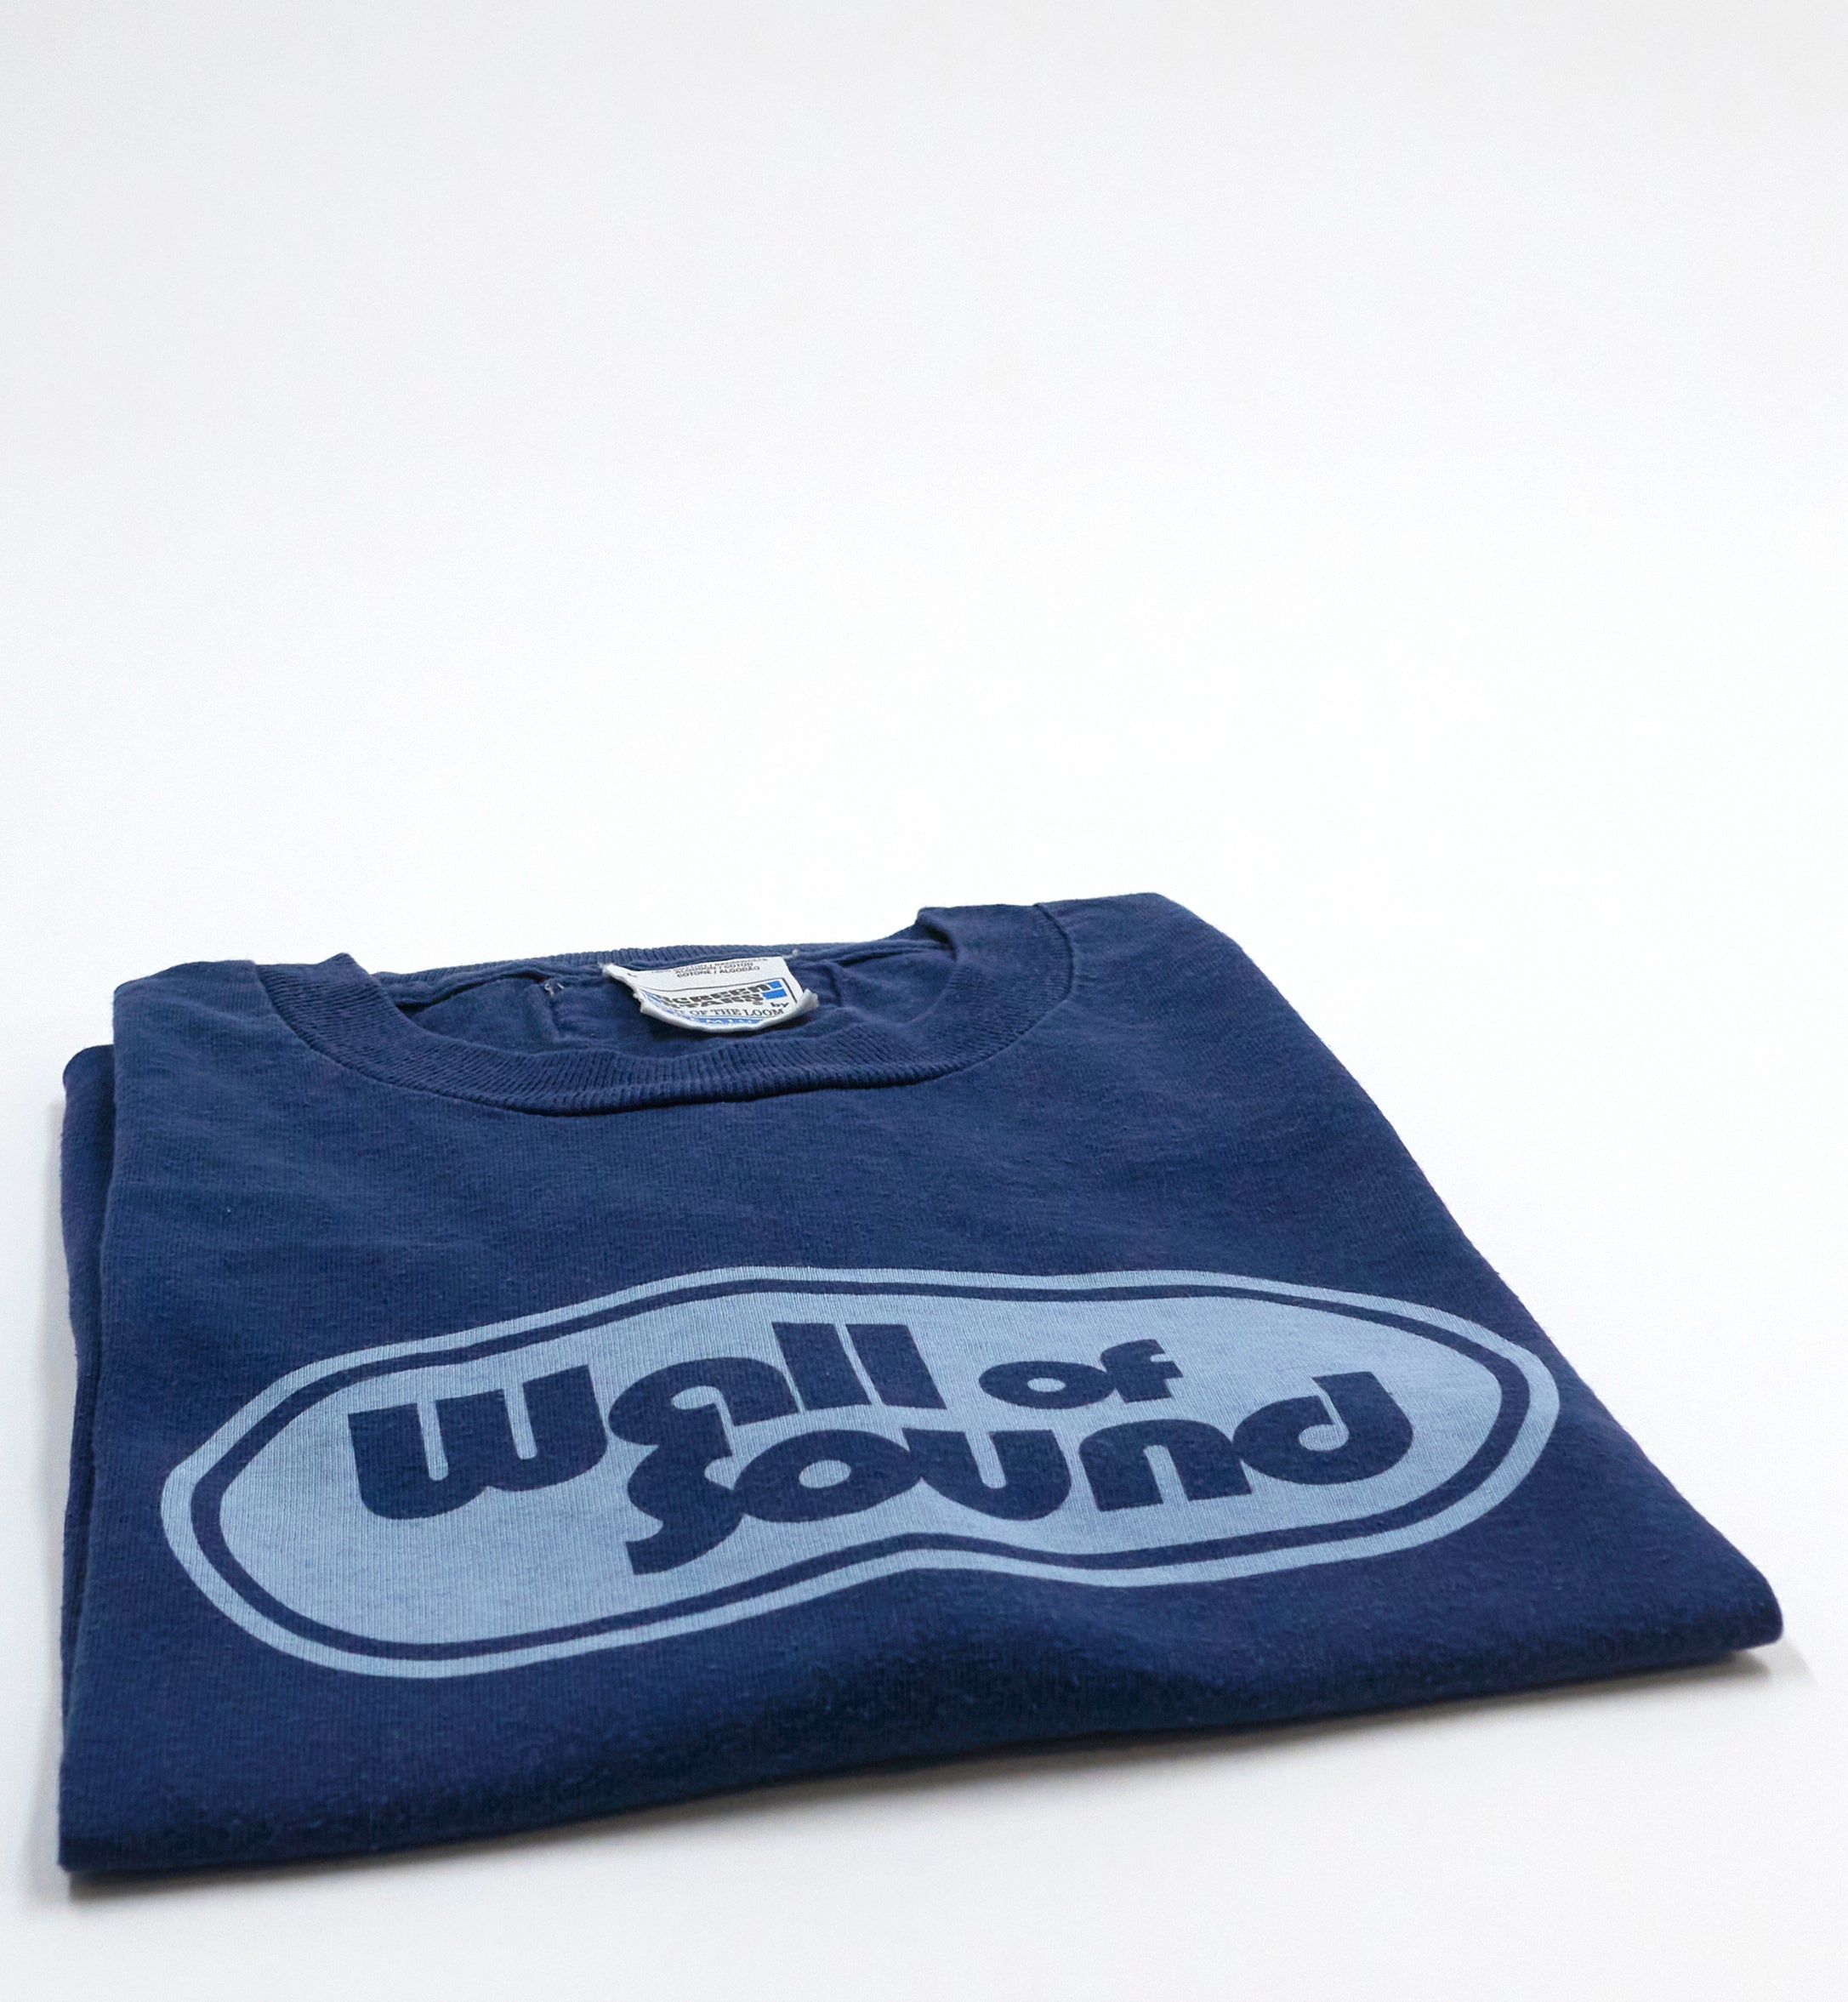 Wall Of Sound Records - Blue Logo Shirt Size Large